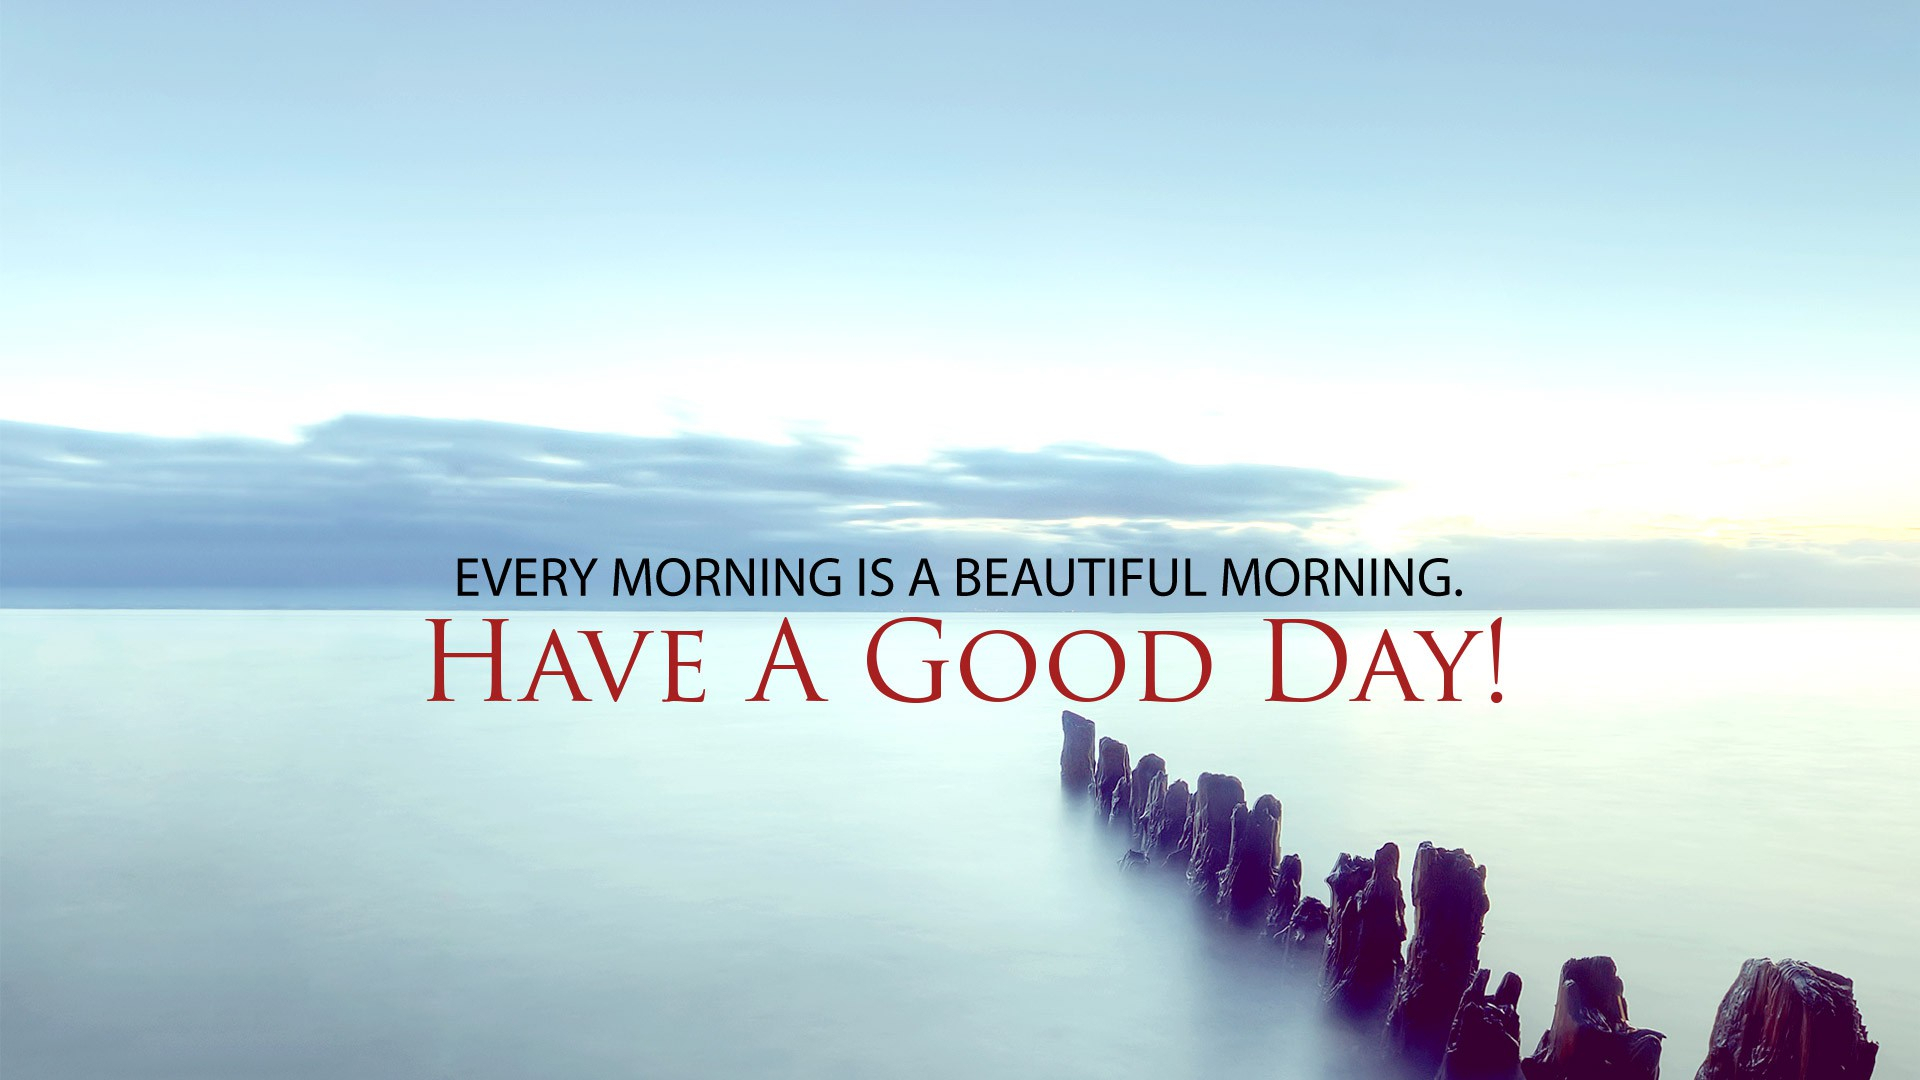 Good Morning And Have A Nice Day At Work Quotes 25+ Inspiring Good Day Quotes